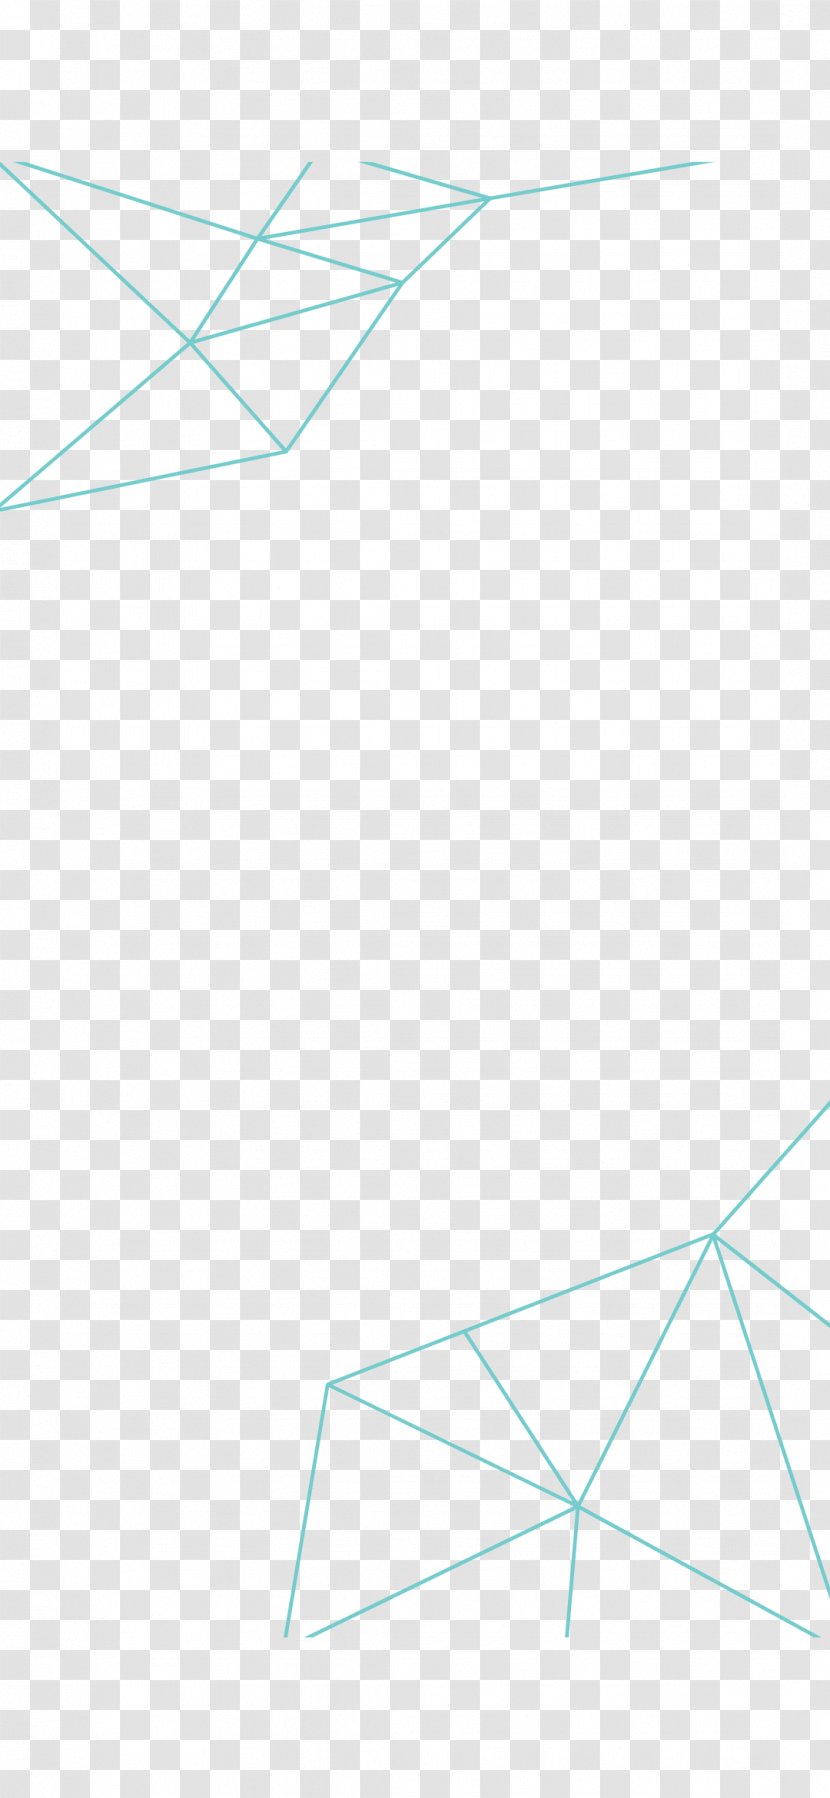 Triangle Point Product Pattern - Wedding Filter Transparent PNG